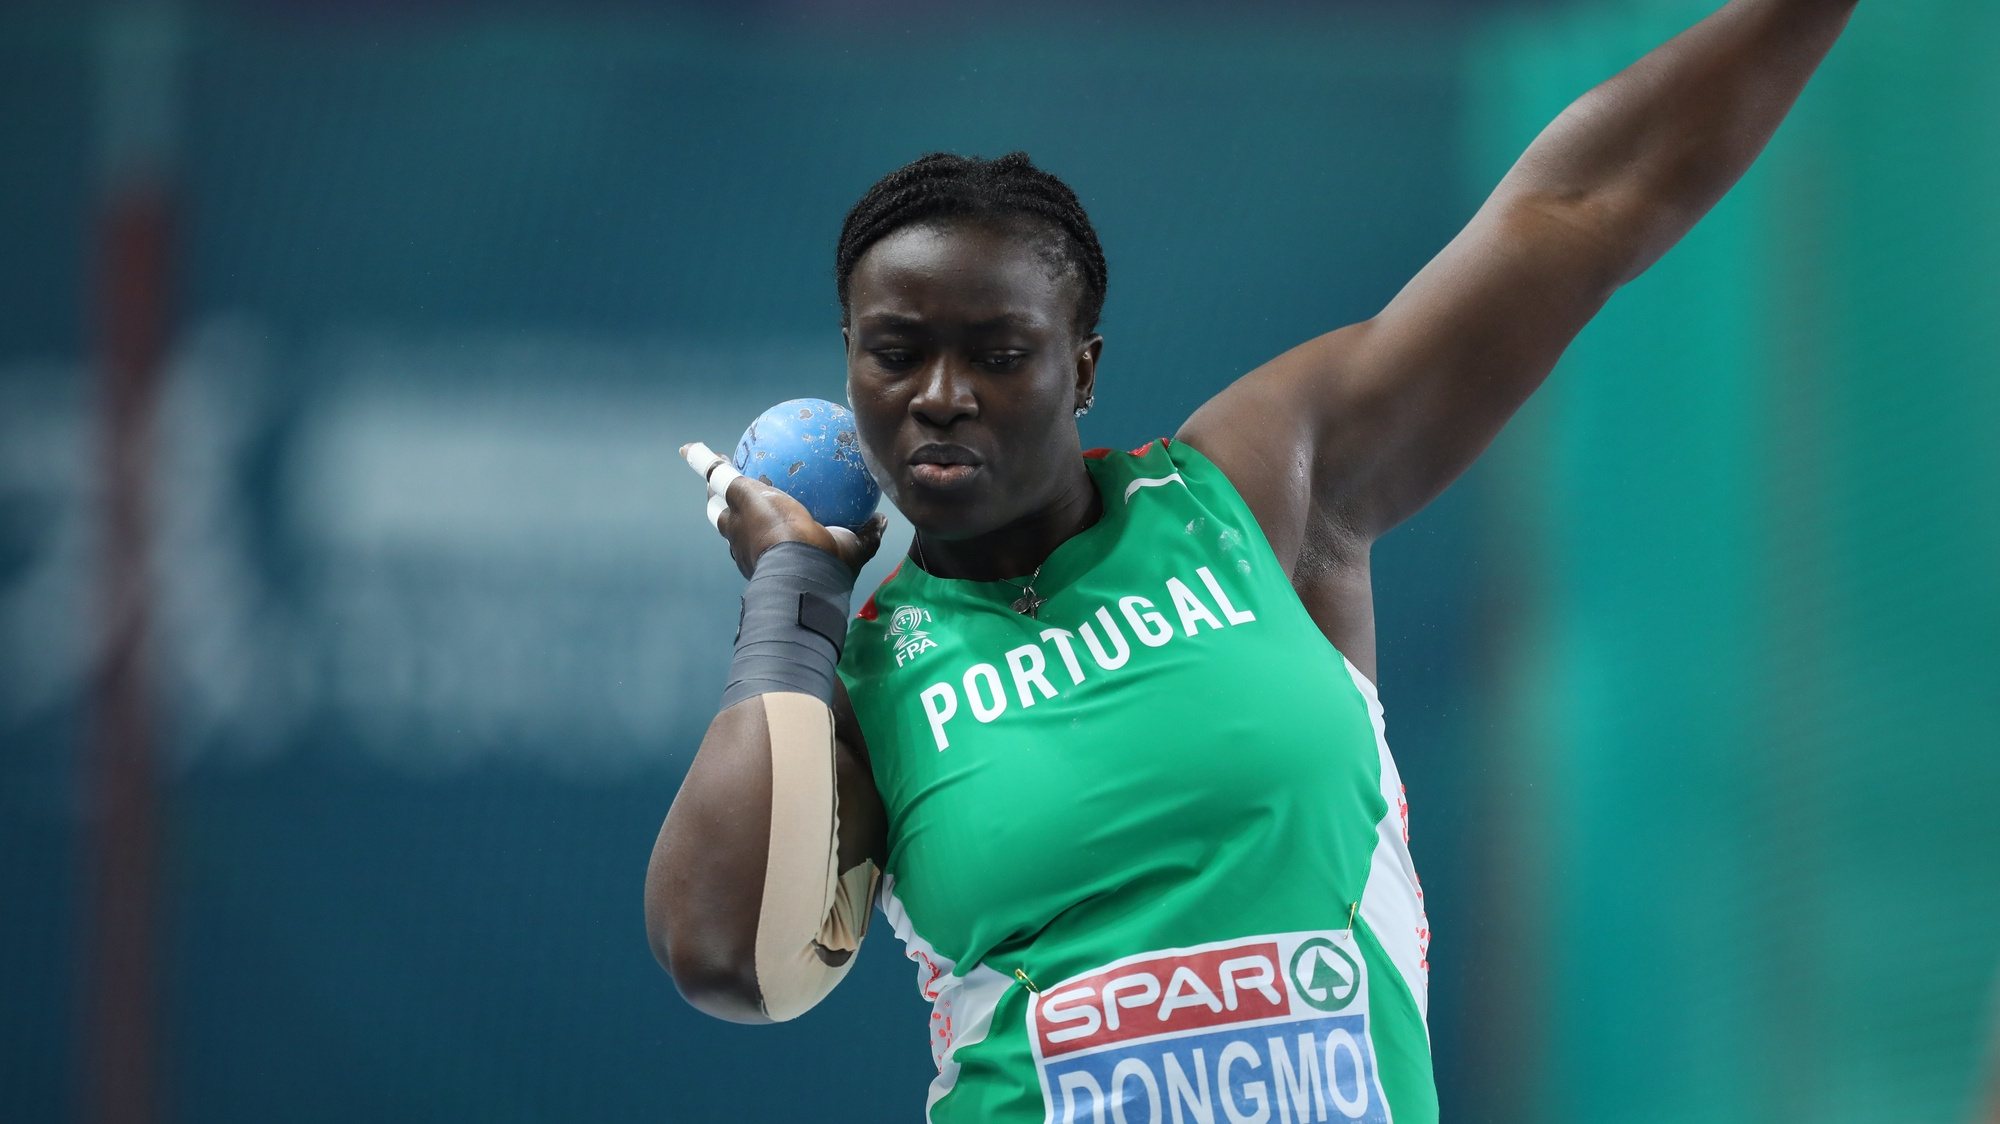 epa09054668 Auriol Dongmo of Portugal competes in the women&#039;s Shot Put final at the 36th European Athletics Indoor Championships at the Arena Torun, in Torun, north-central Poland, 05 March 2021.  EPA/Leszek Szymanski POLAND OUT